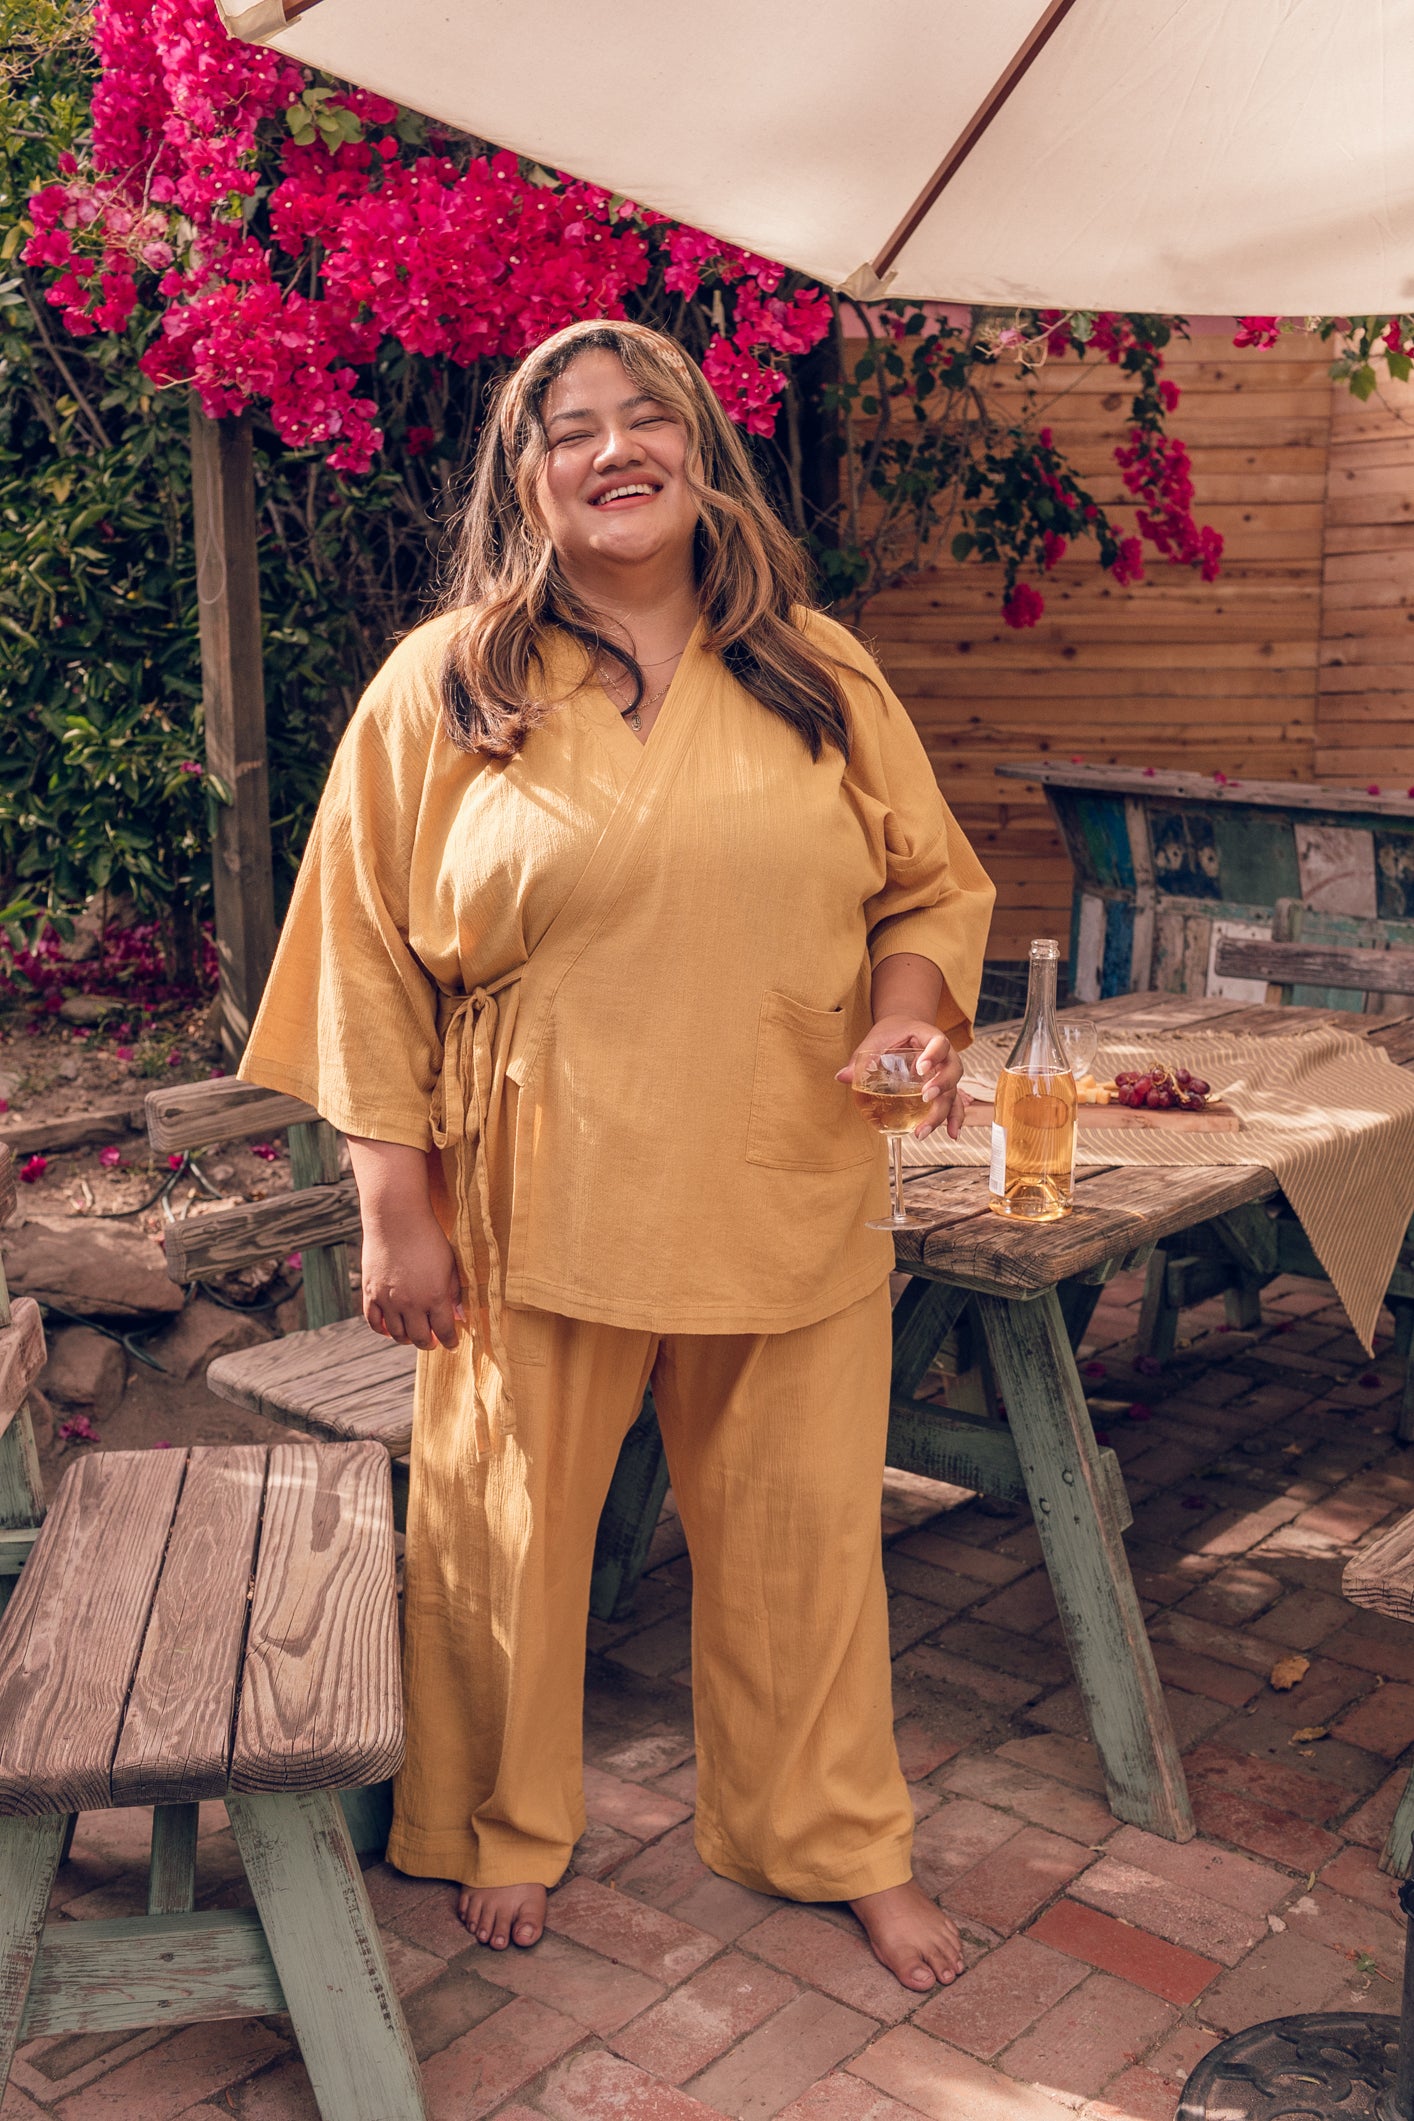 Kardeş Sile Loungewear Top and Pants in Marigold | Plus Size | Luxury 100%  Soft Turkish Sile Cotton | Indoor and Outdoor Wear – OddBird